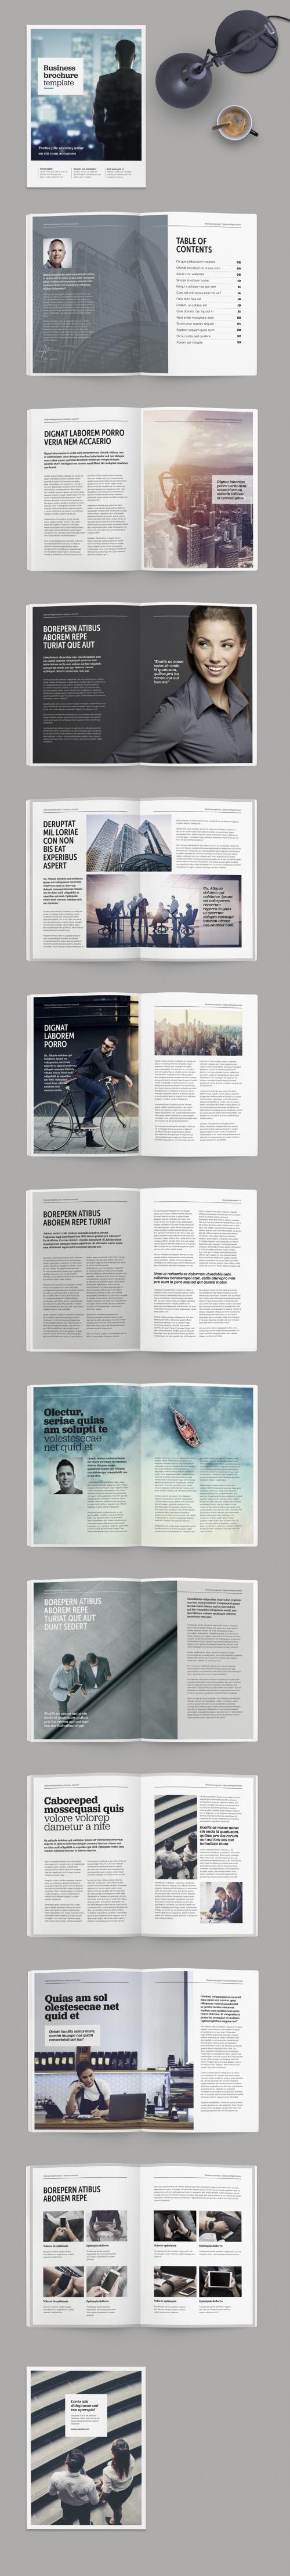 Brochure/Magazine Layout with Bold Title Treatments - 222543725